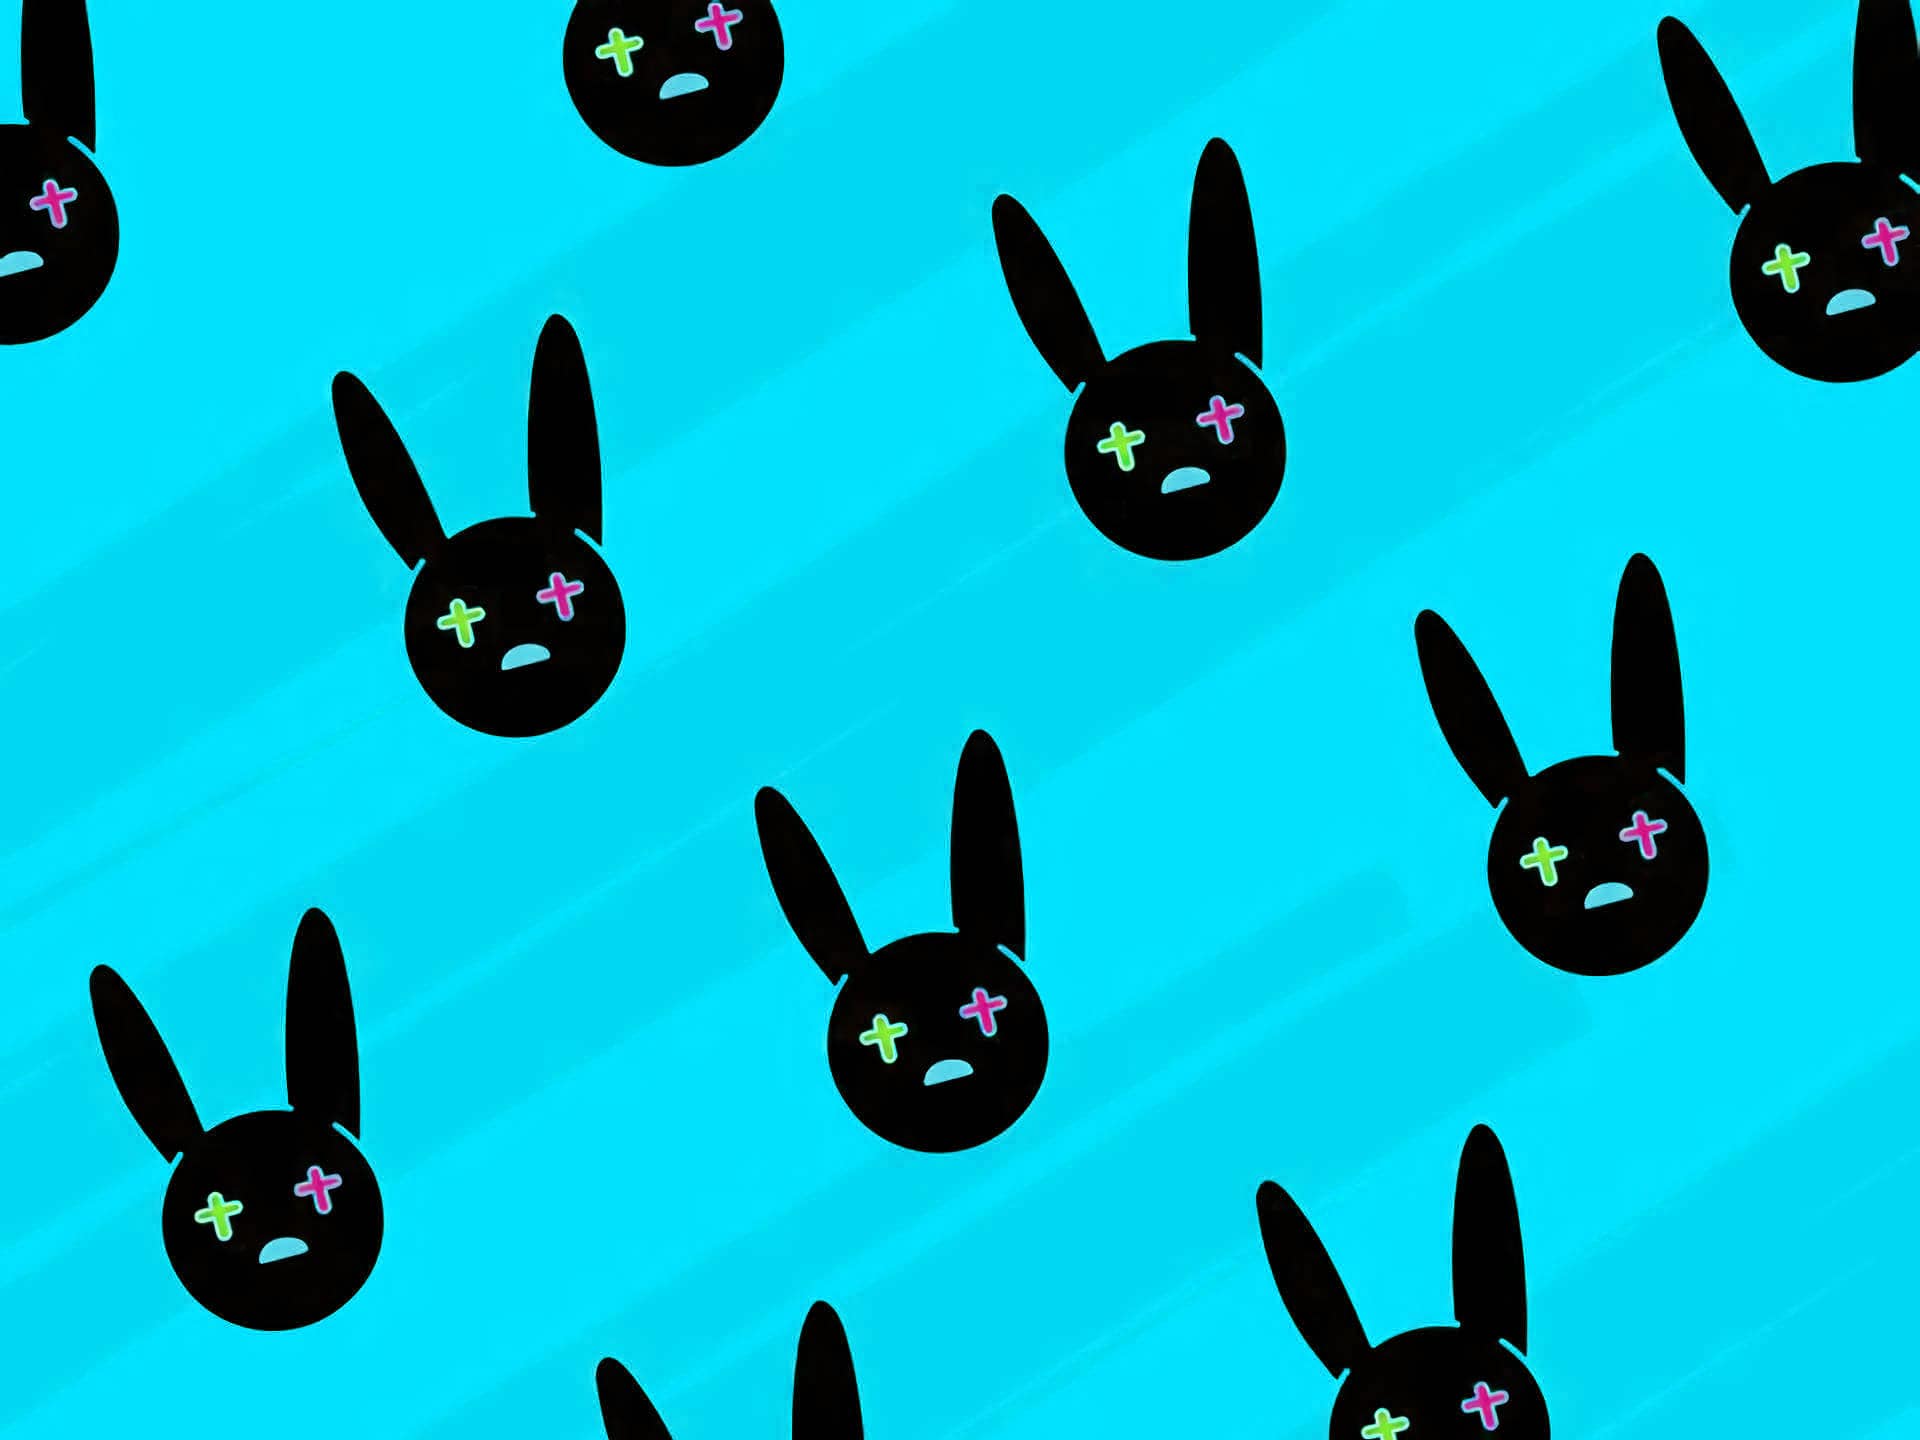 A pattern of black rabbits with a sad face and a star or cross on their foreheads against a blue background. - Bad Bunny